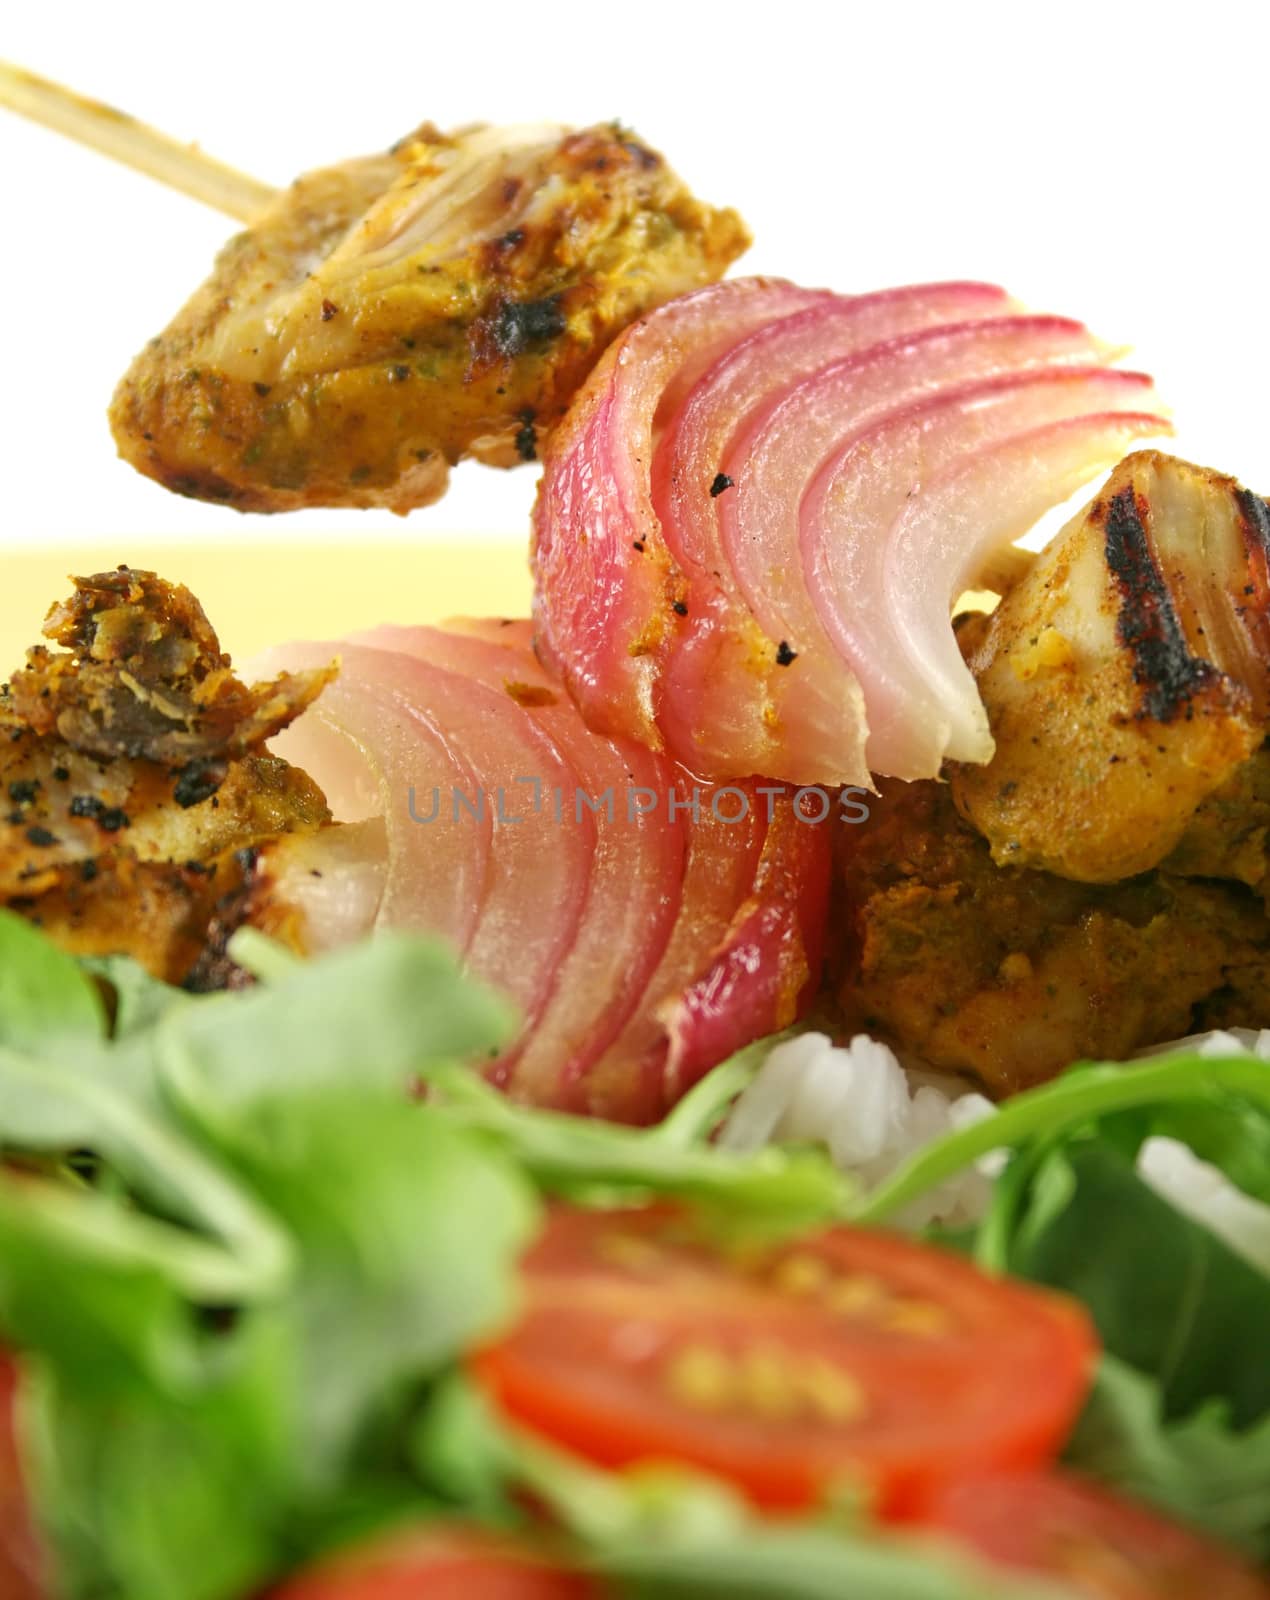 Chicken tandoori skewers with red onion and a rocket salad.